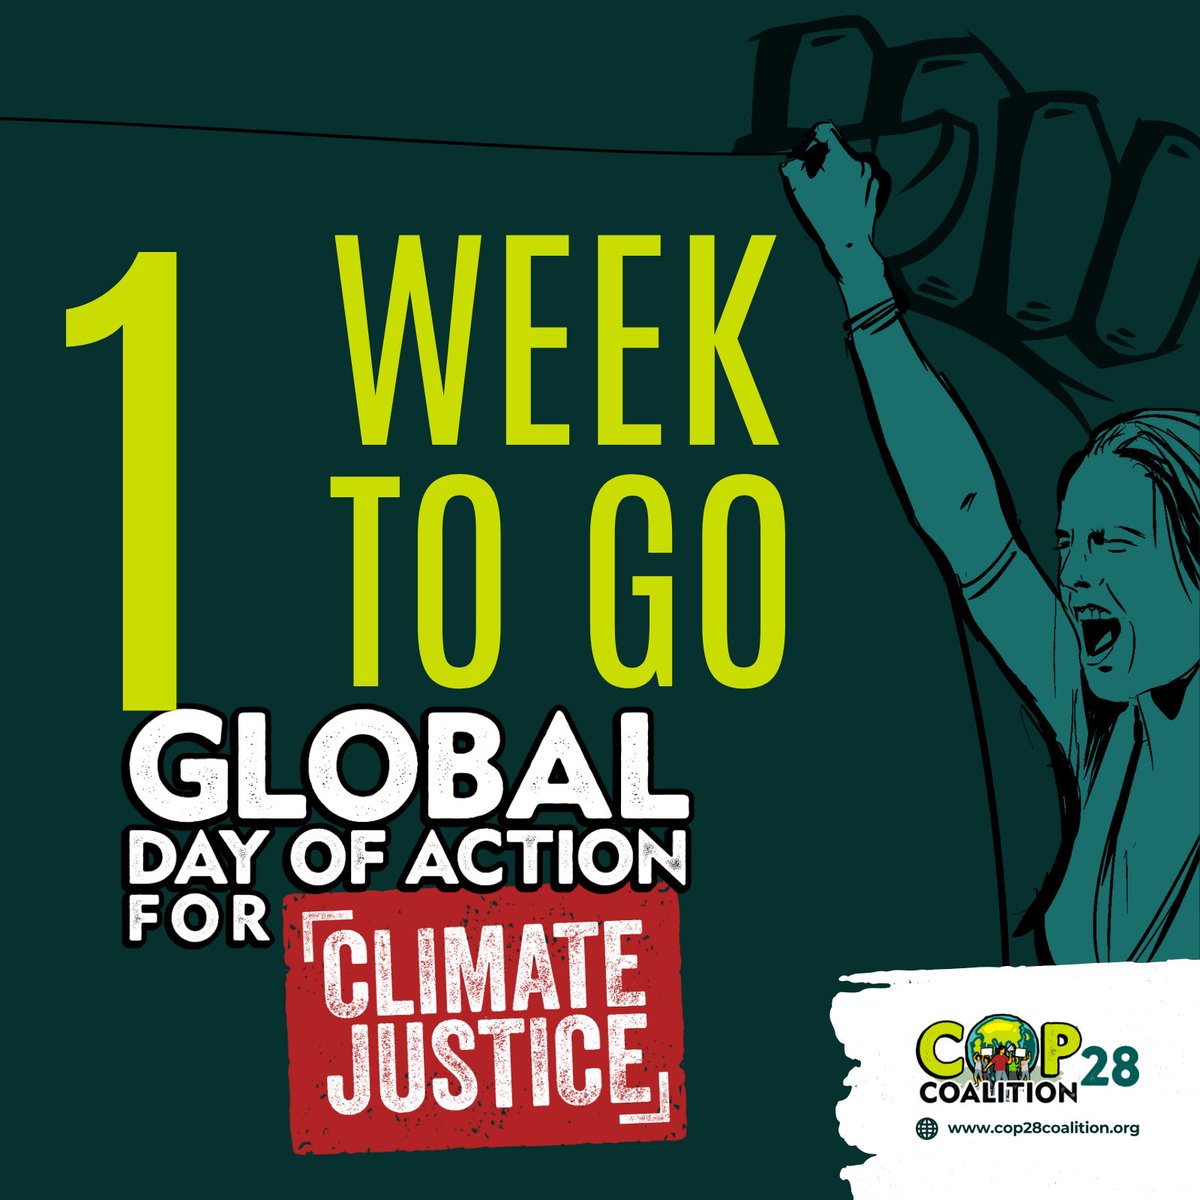 #Fight4ClimateJustice #systemschange

#NowWeRise – Bournemouth COP28 Day of Action - is only 1 week away!

Assemble with us at Bournemouth Pier Approach on December 9th from 11am. At midday we'll march to demand climate justice!

fb.me/e/61qg2WhRt